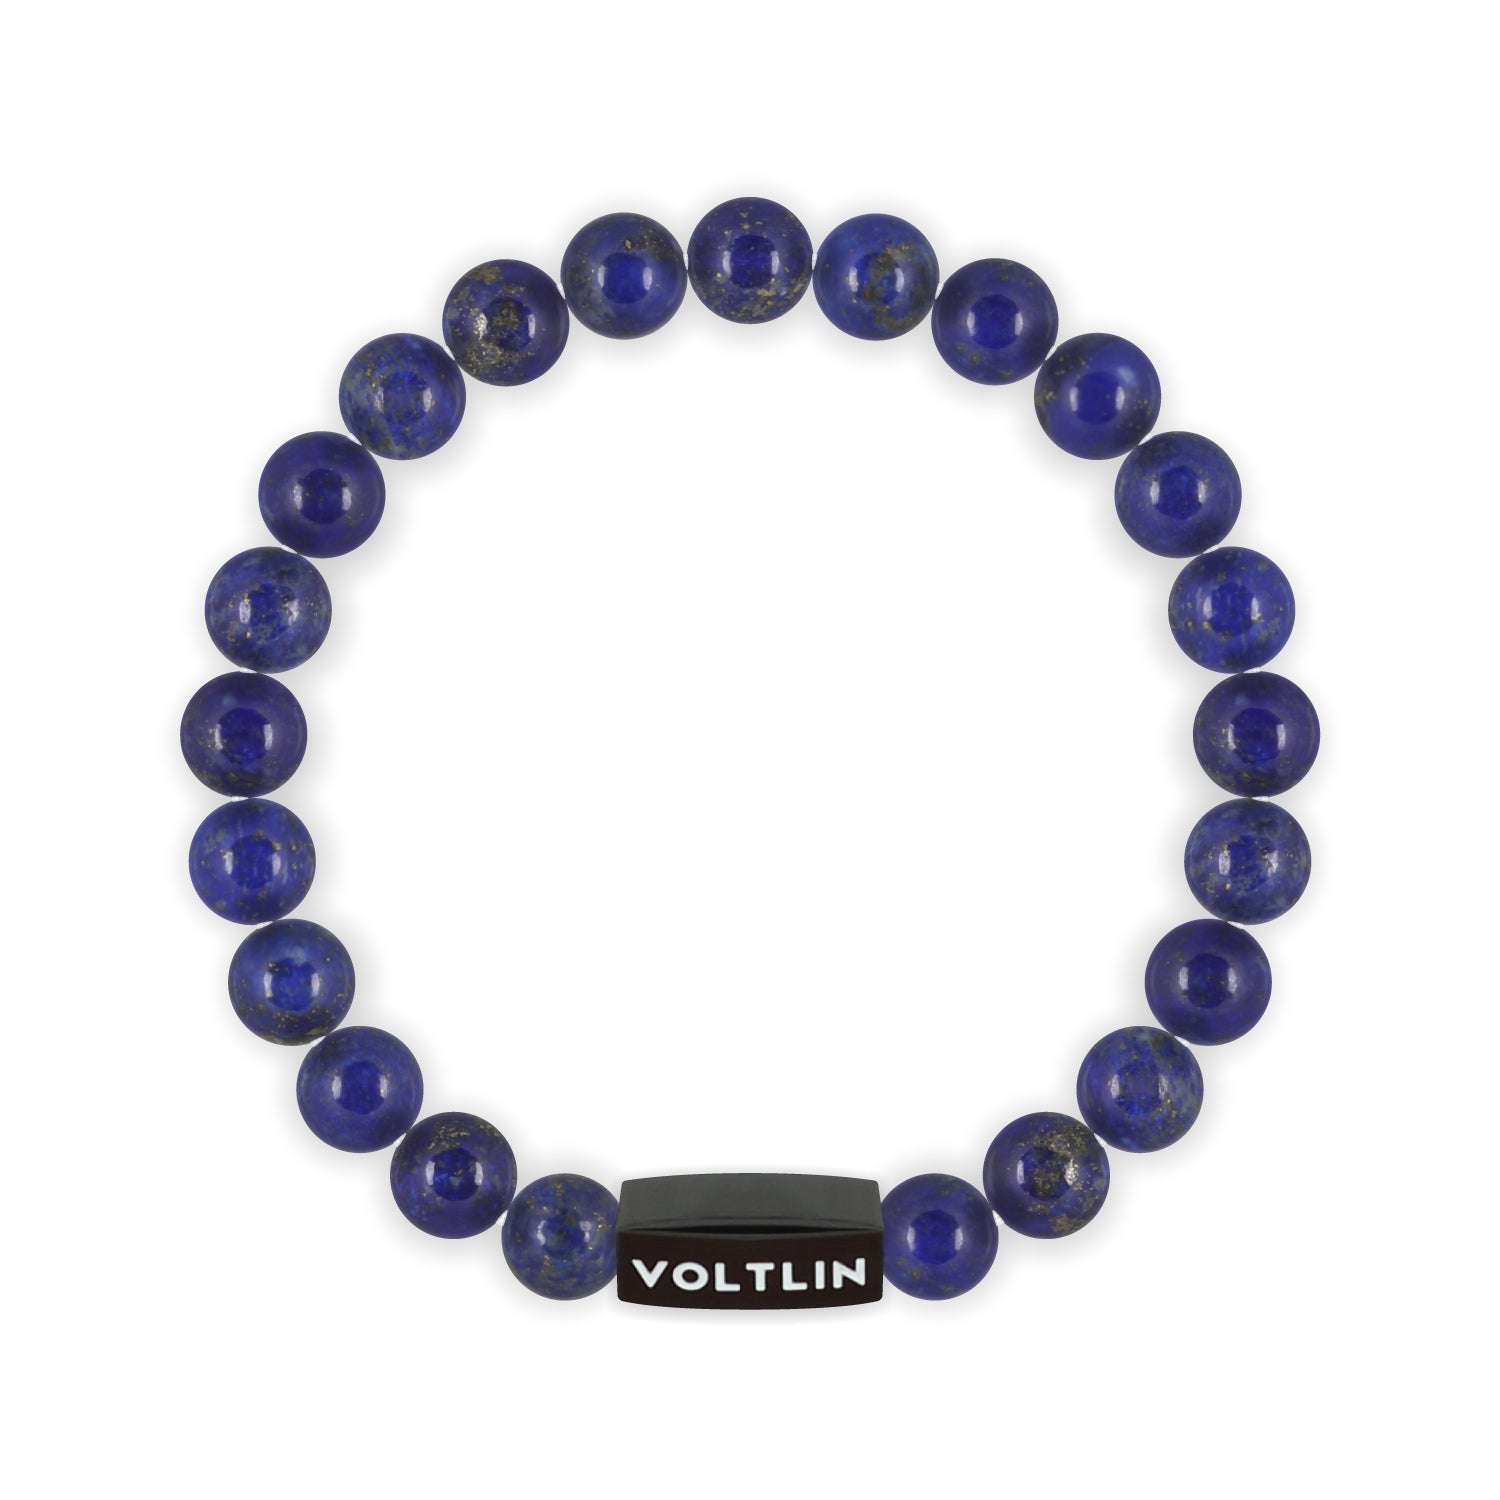 Front view of an 8mm Lapis Lazuli crystal beaded stretch bracelet with black stainless steel logo bead made by Voltlin